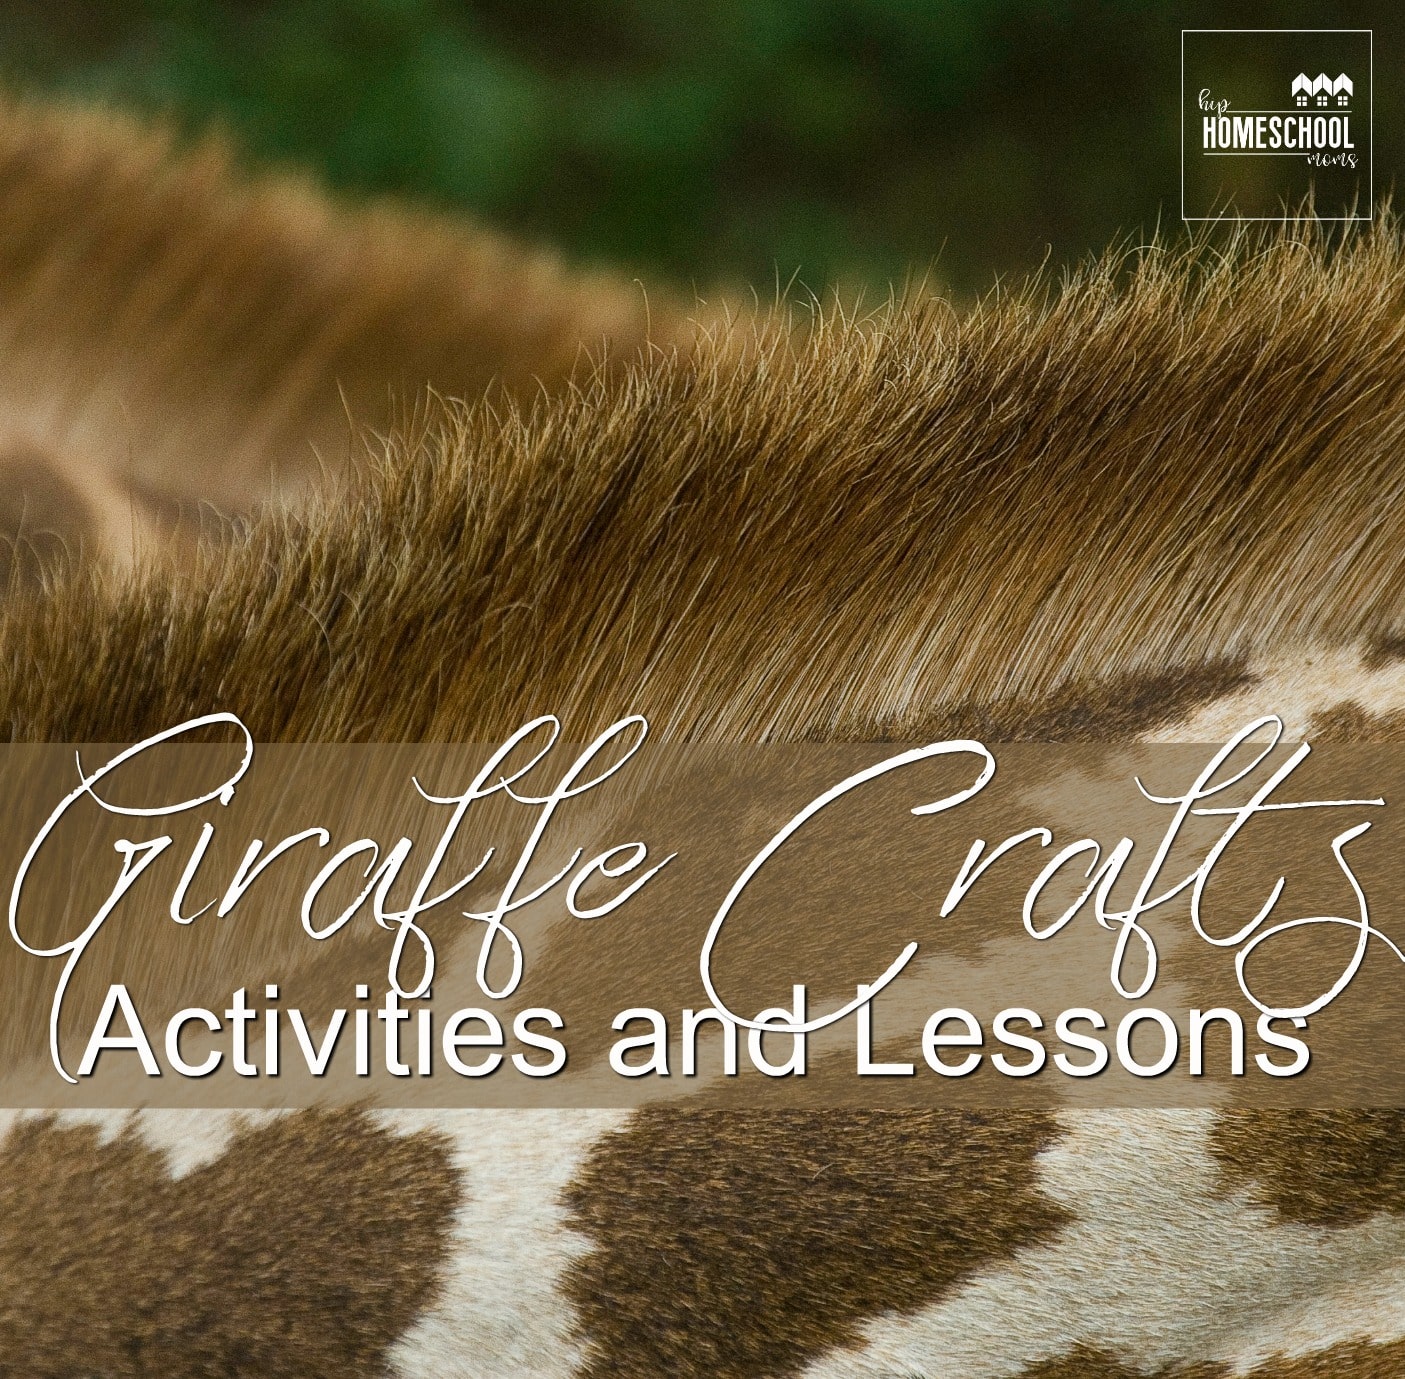 Giraffe Crafts, Activities, and Lessons